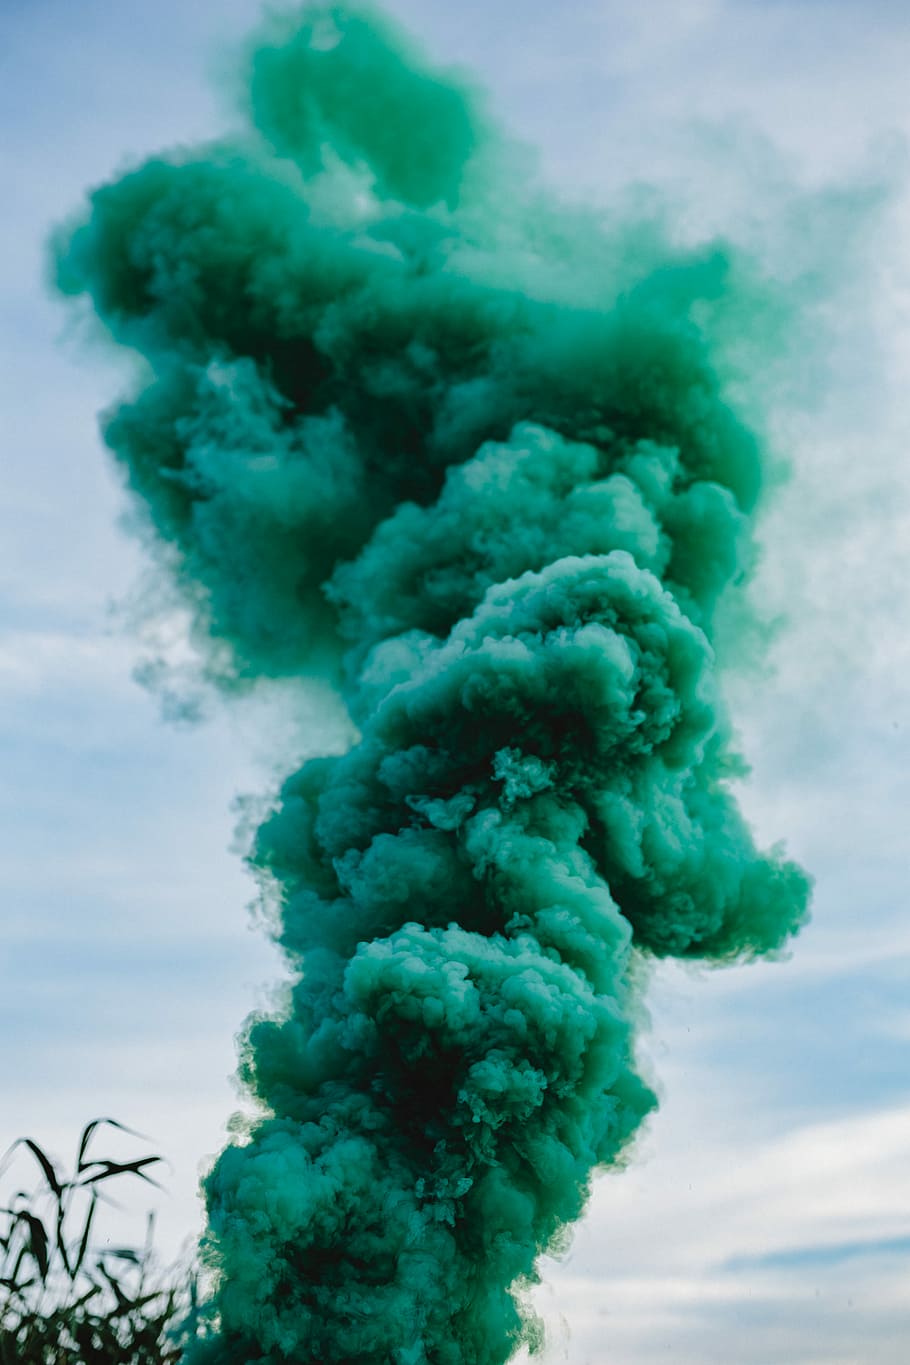 Green smoke bomb, abstract, background, outdoor, nature, sky